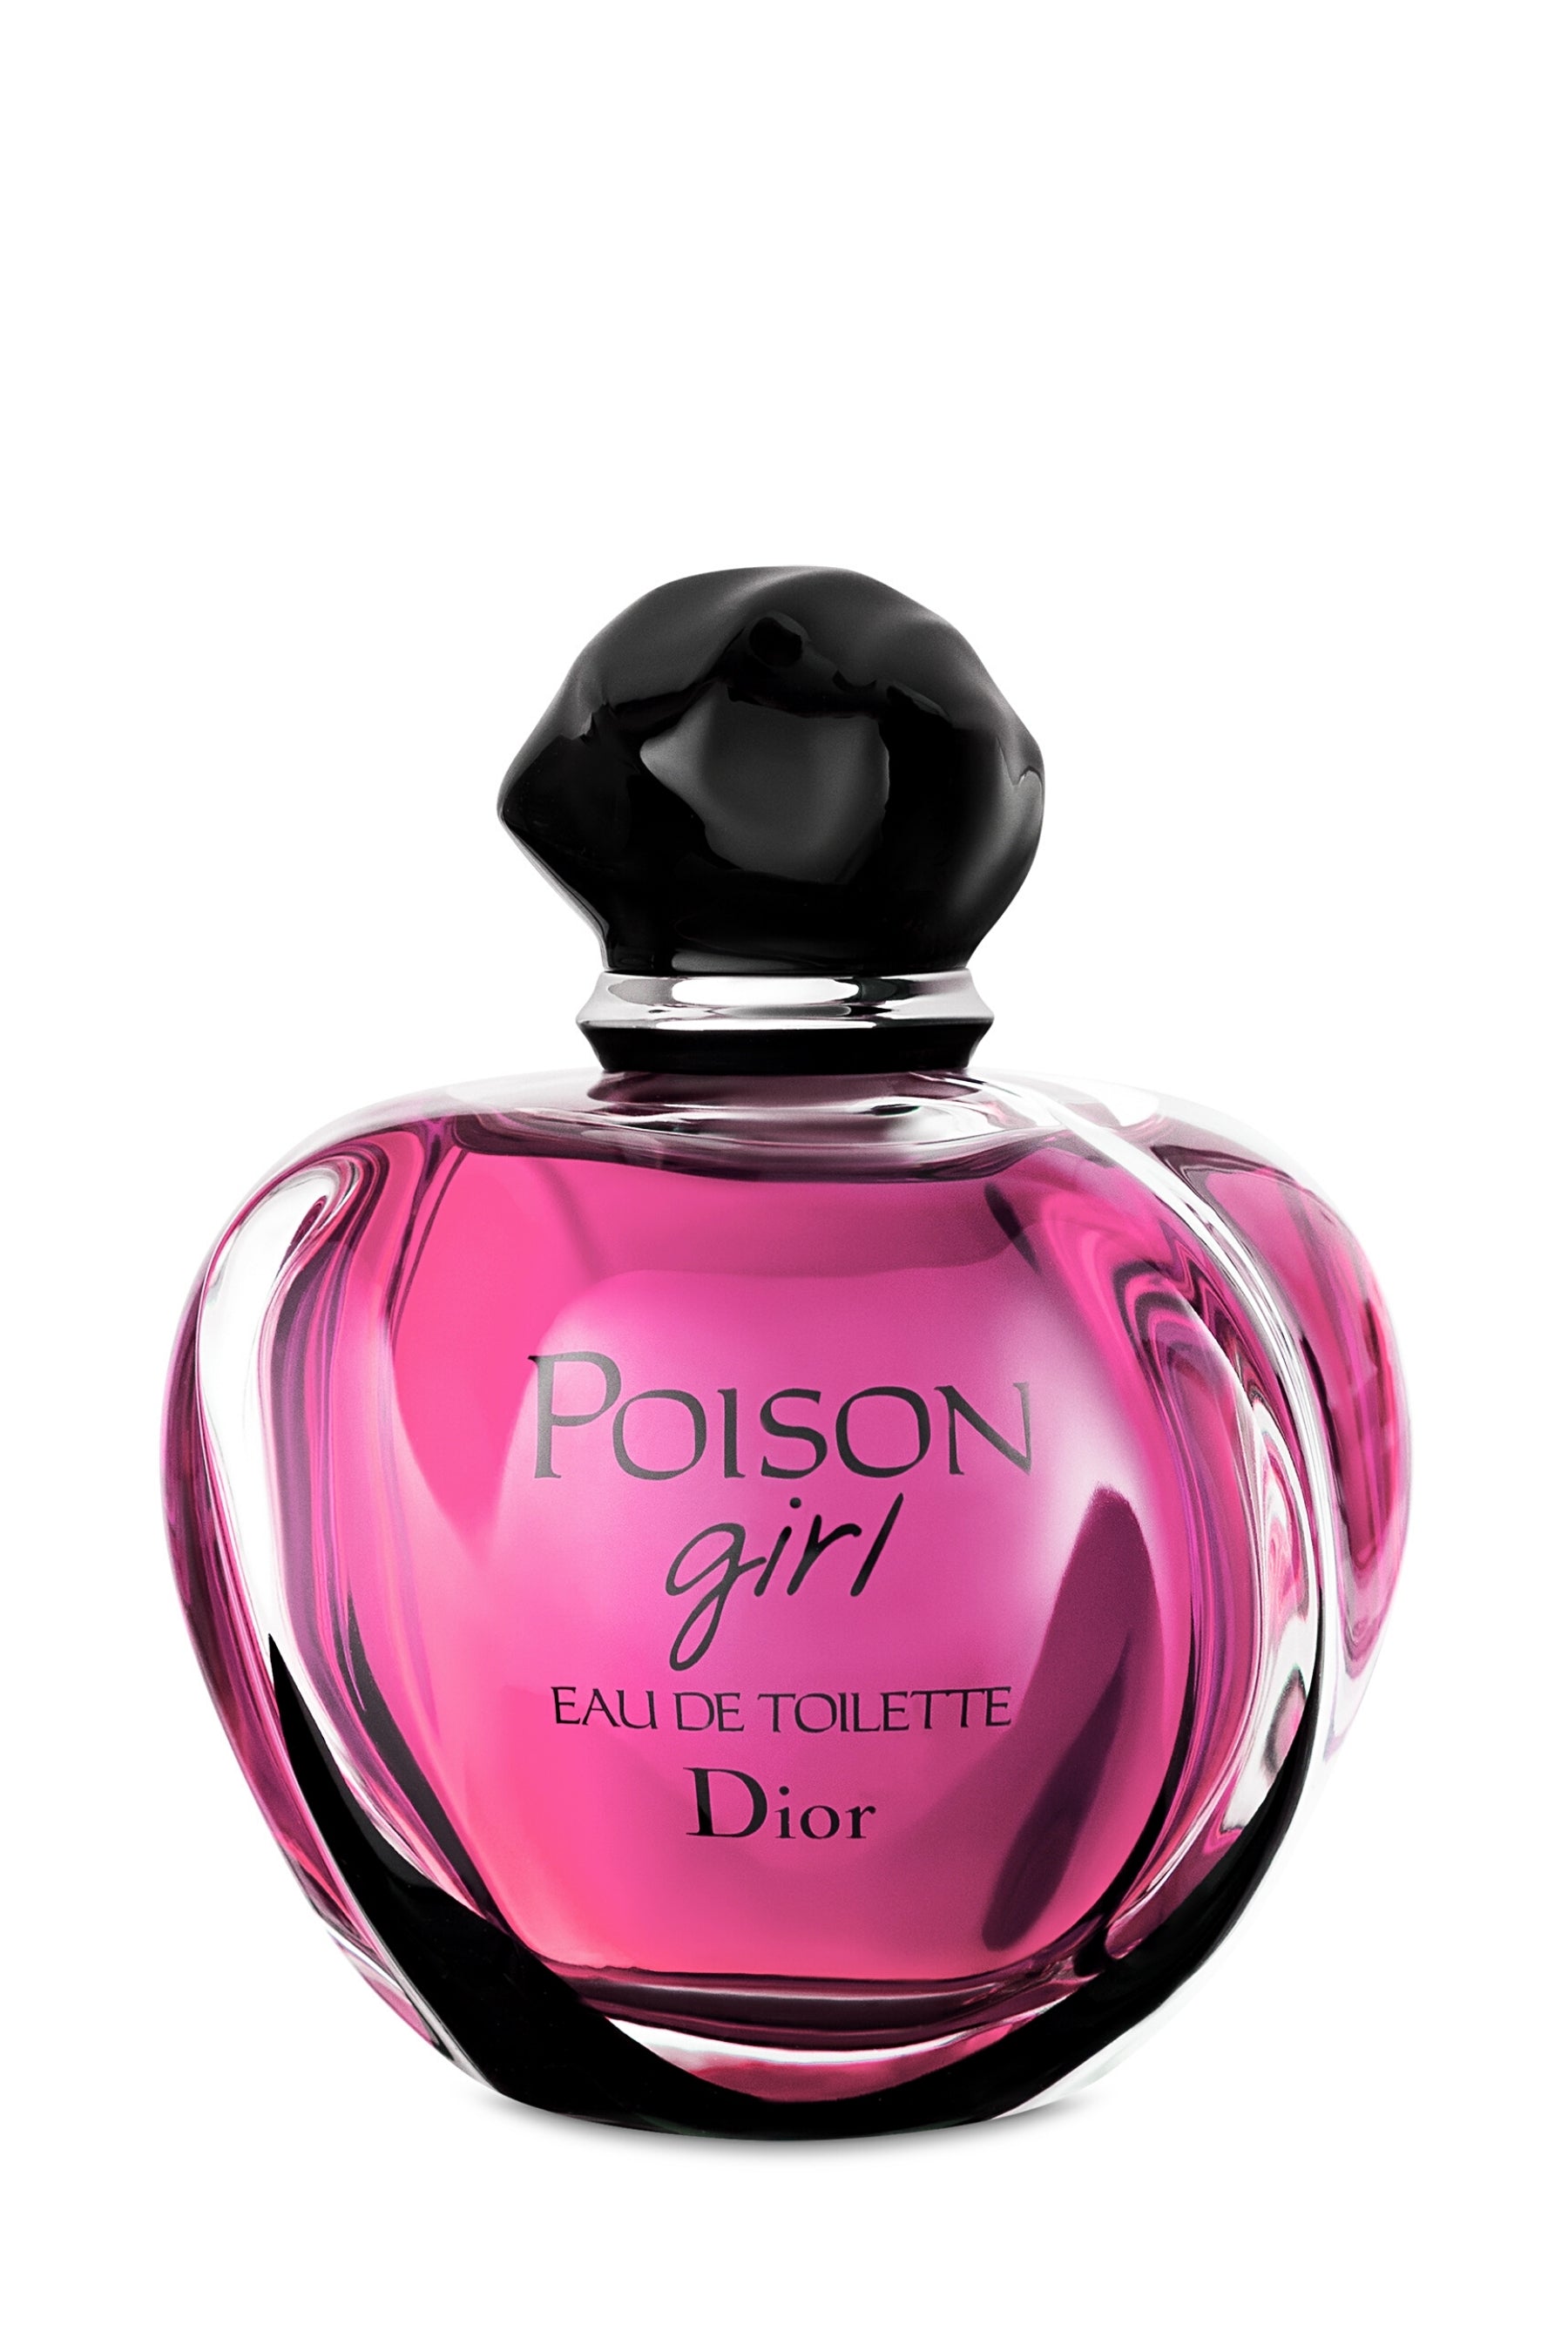 POISON GIRL by Christian Dior perfume for women EDT 3.3 / 3.4 oz